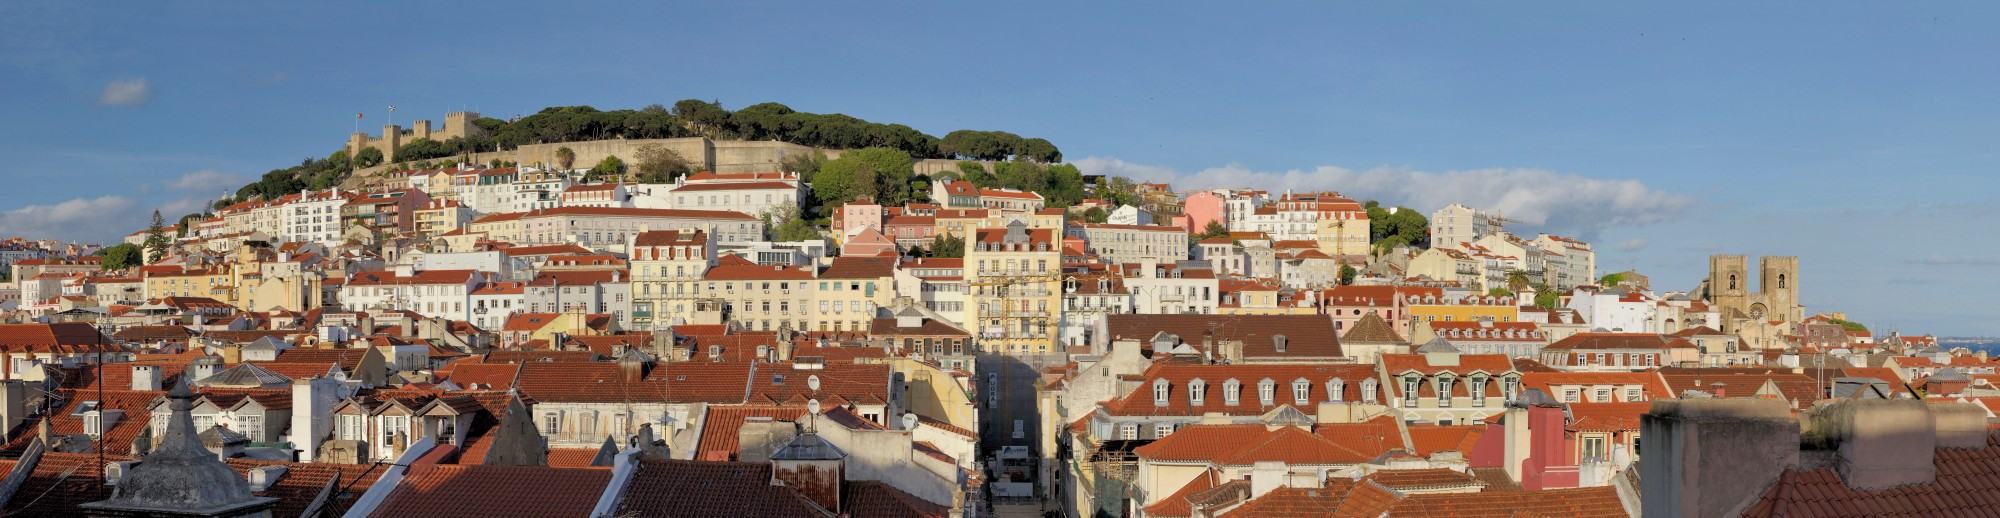 View of Lisbon from the Chiado